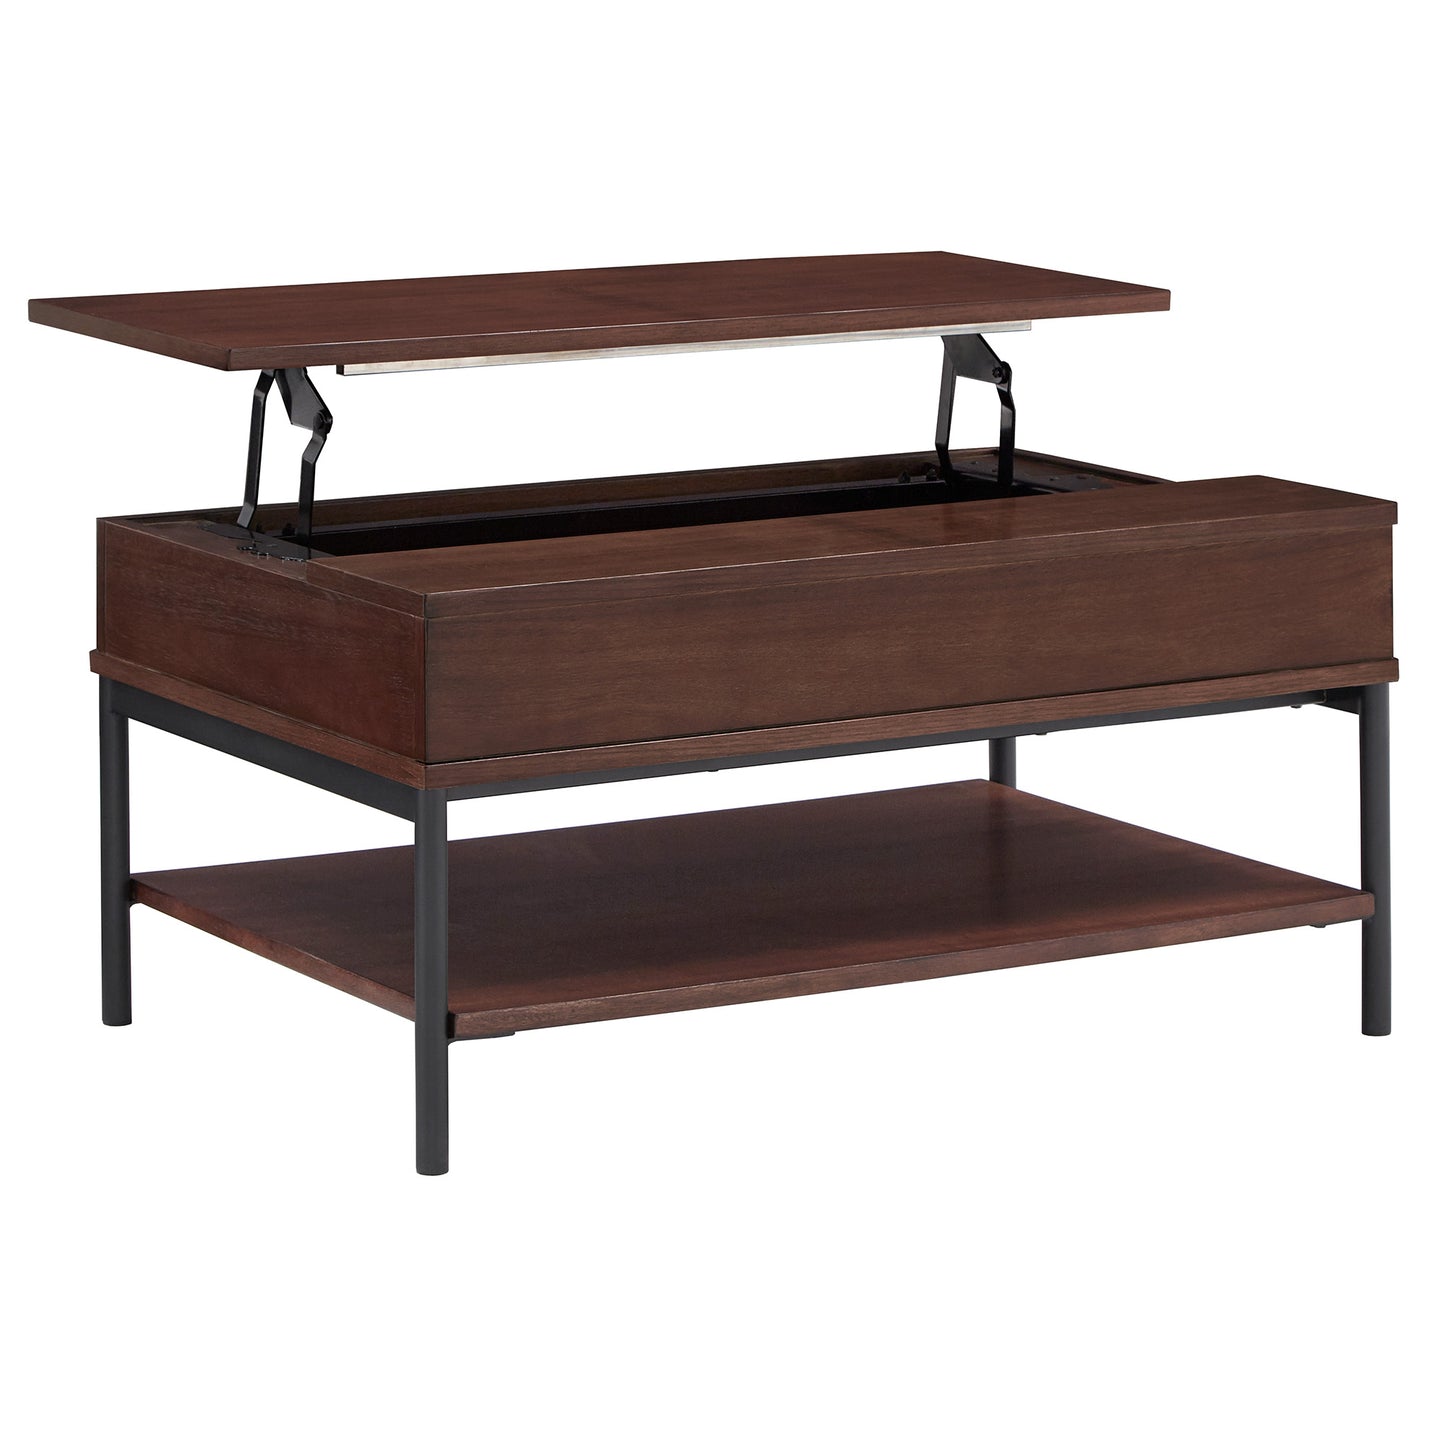 Two-Tone Lift-Top Rectangular Tables - Walnut Finish, End Table and Coffee Table Set